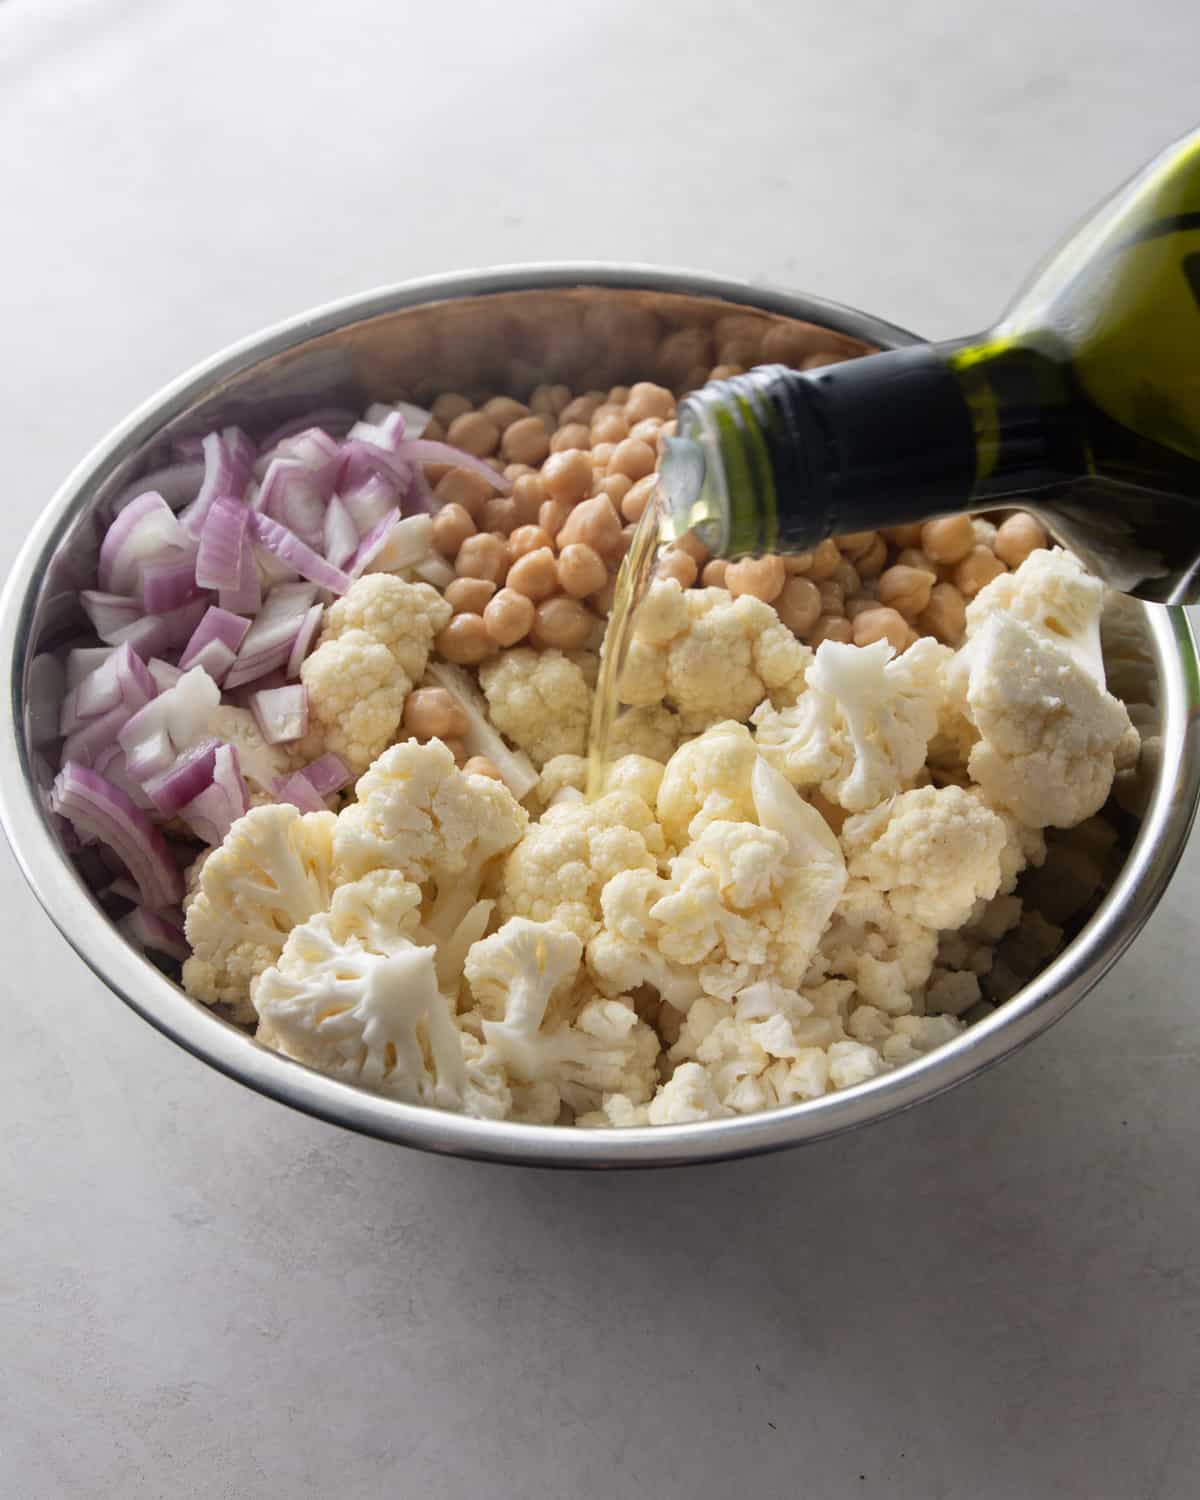 adding olive oil to cauliflower ingredients in a metal bowl